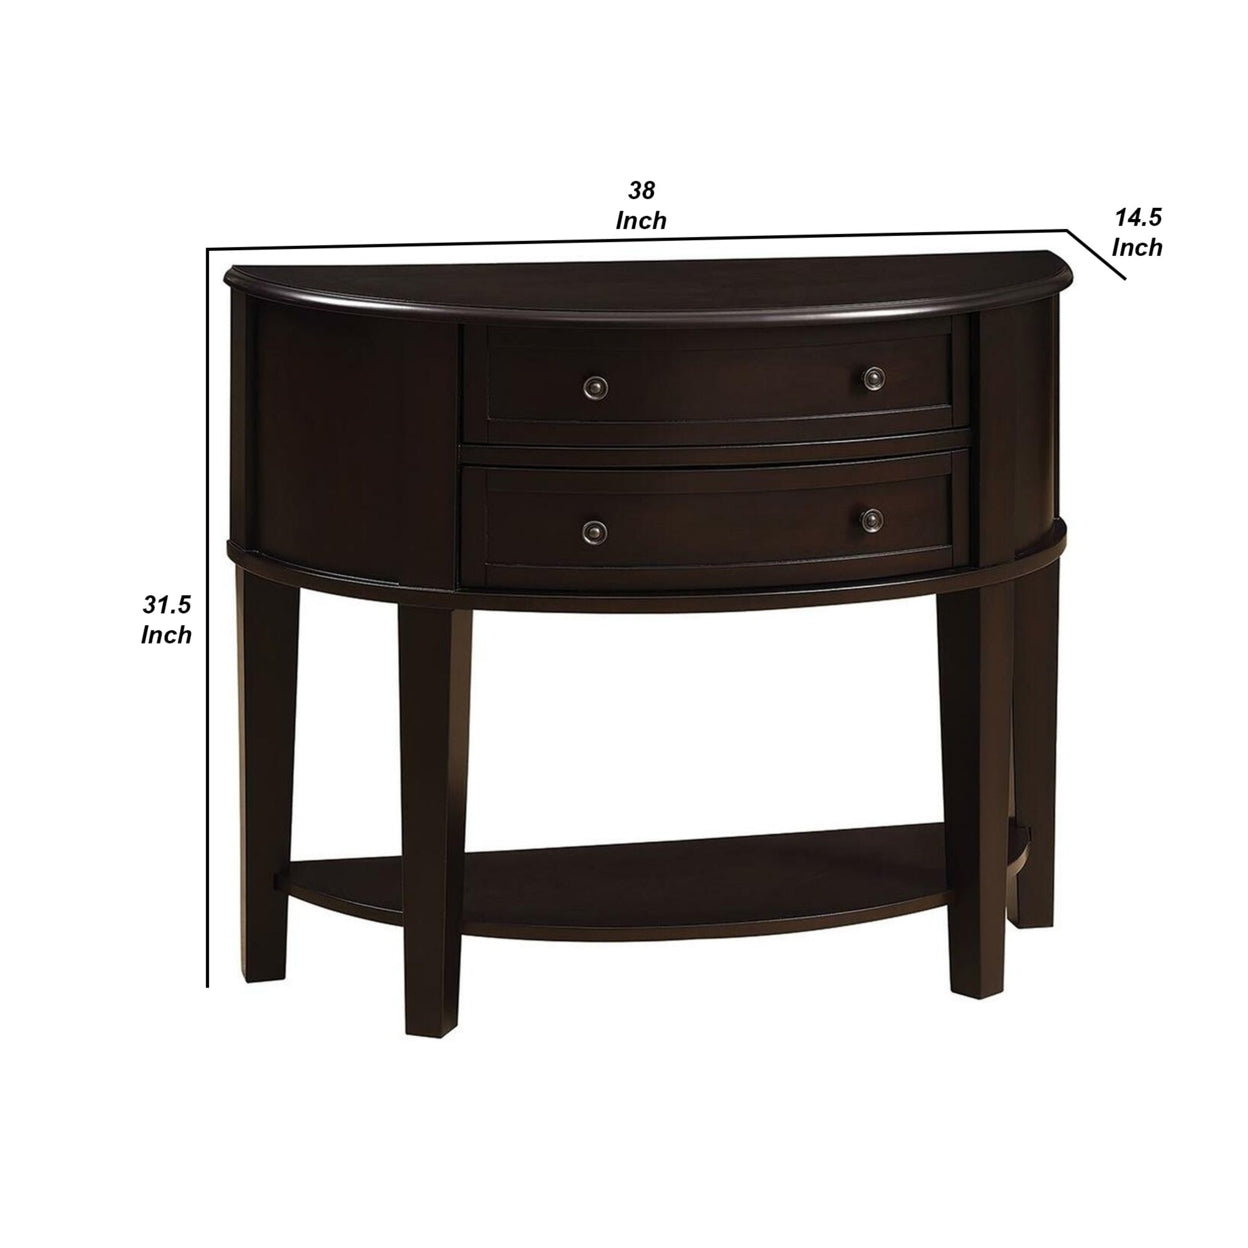 2-drawer Demilune Shape Console Table Cappuccino